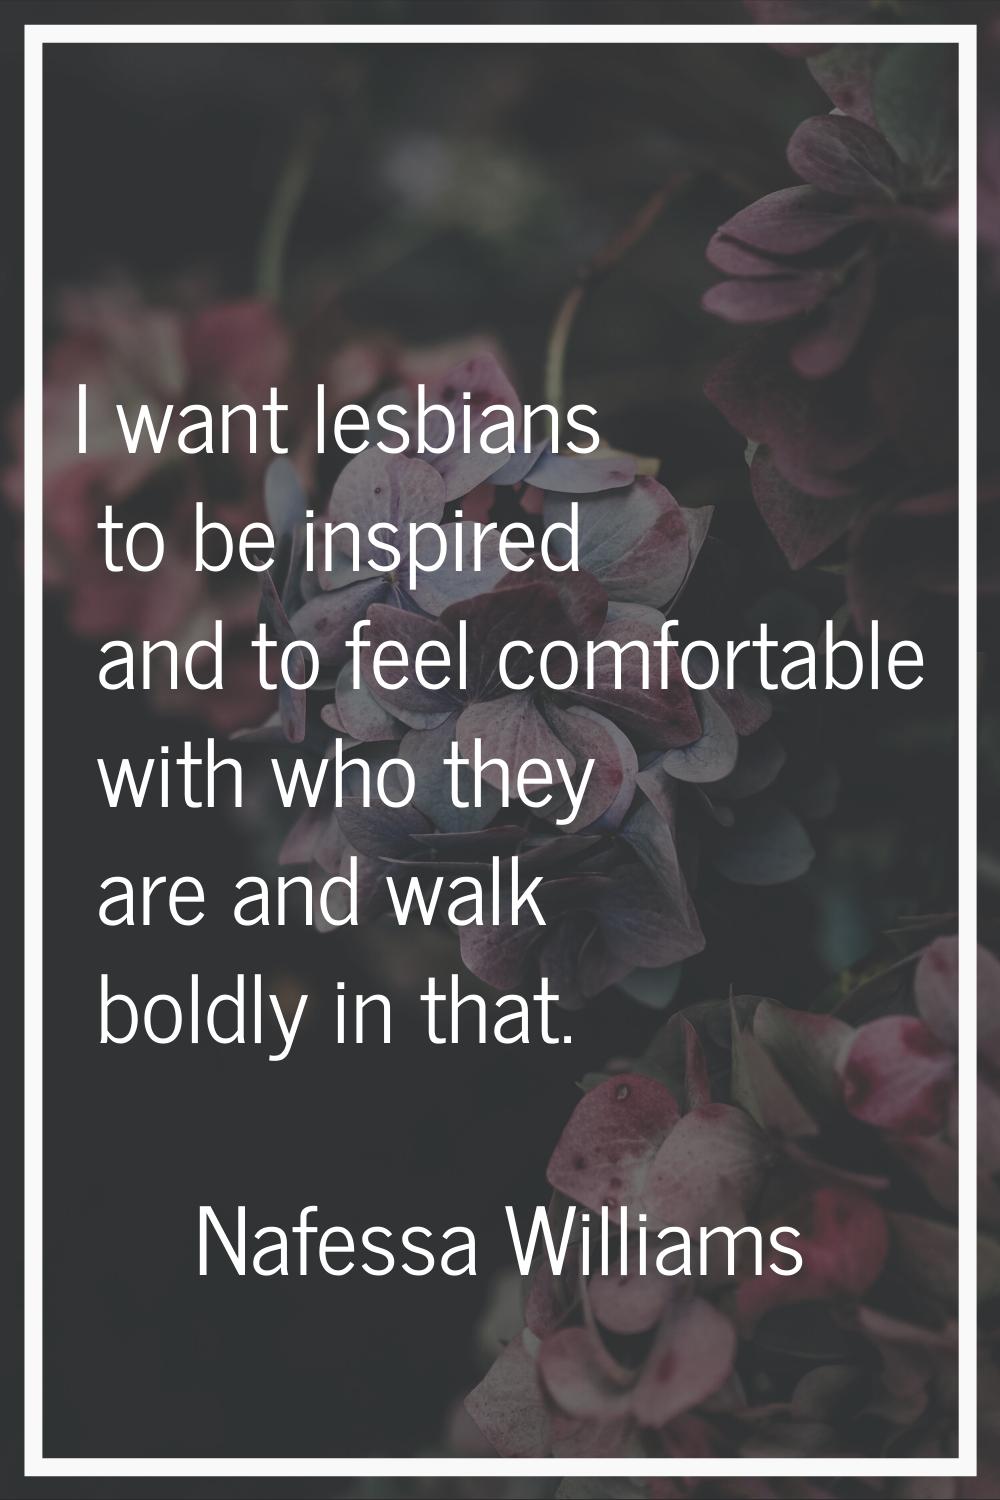 I want lesbians to be inspired and to feel comfortable with who they are and walk boldly in that.